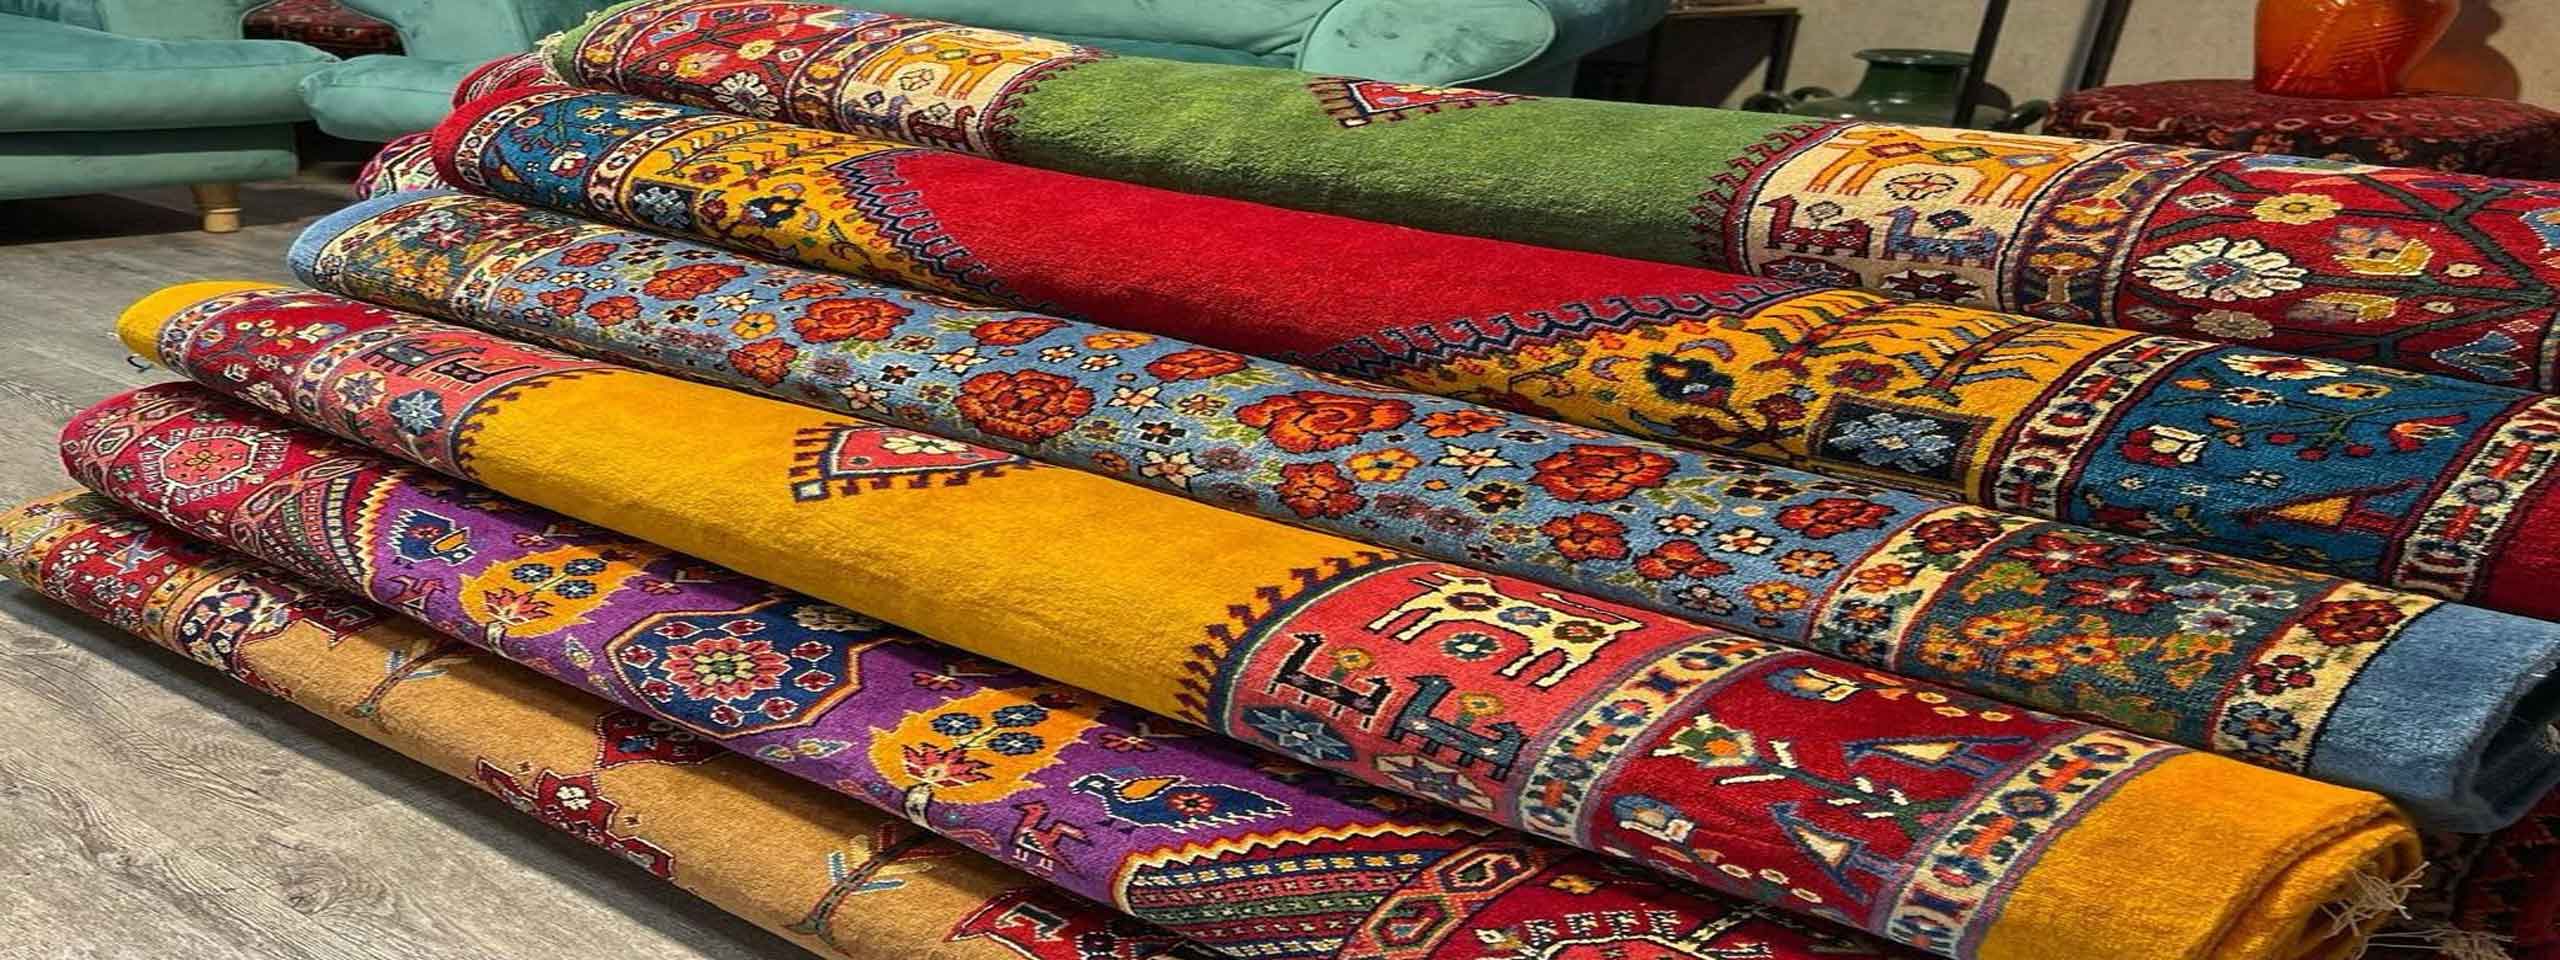 How to take care of Persian rug: 30 tips to make Persian rug last